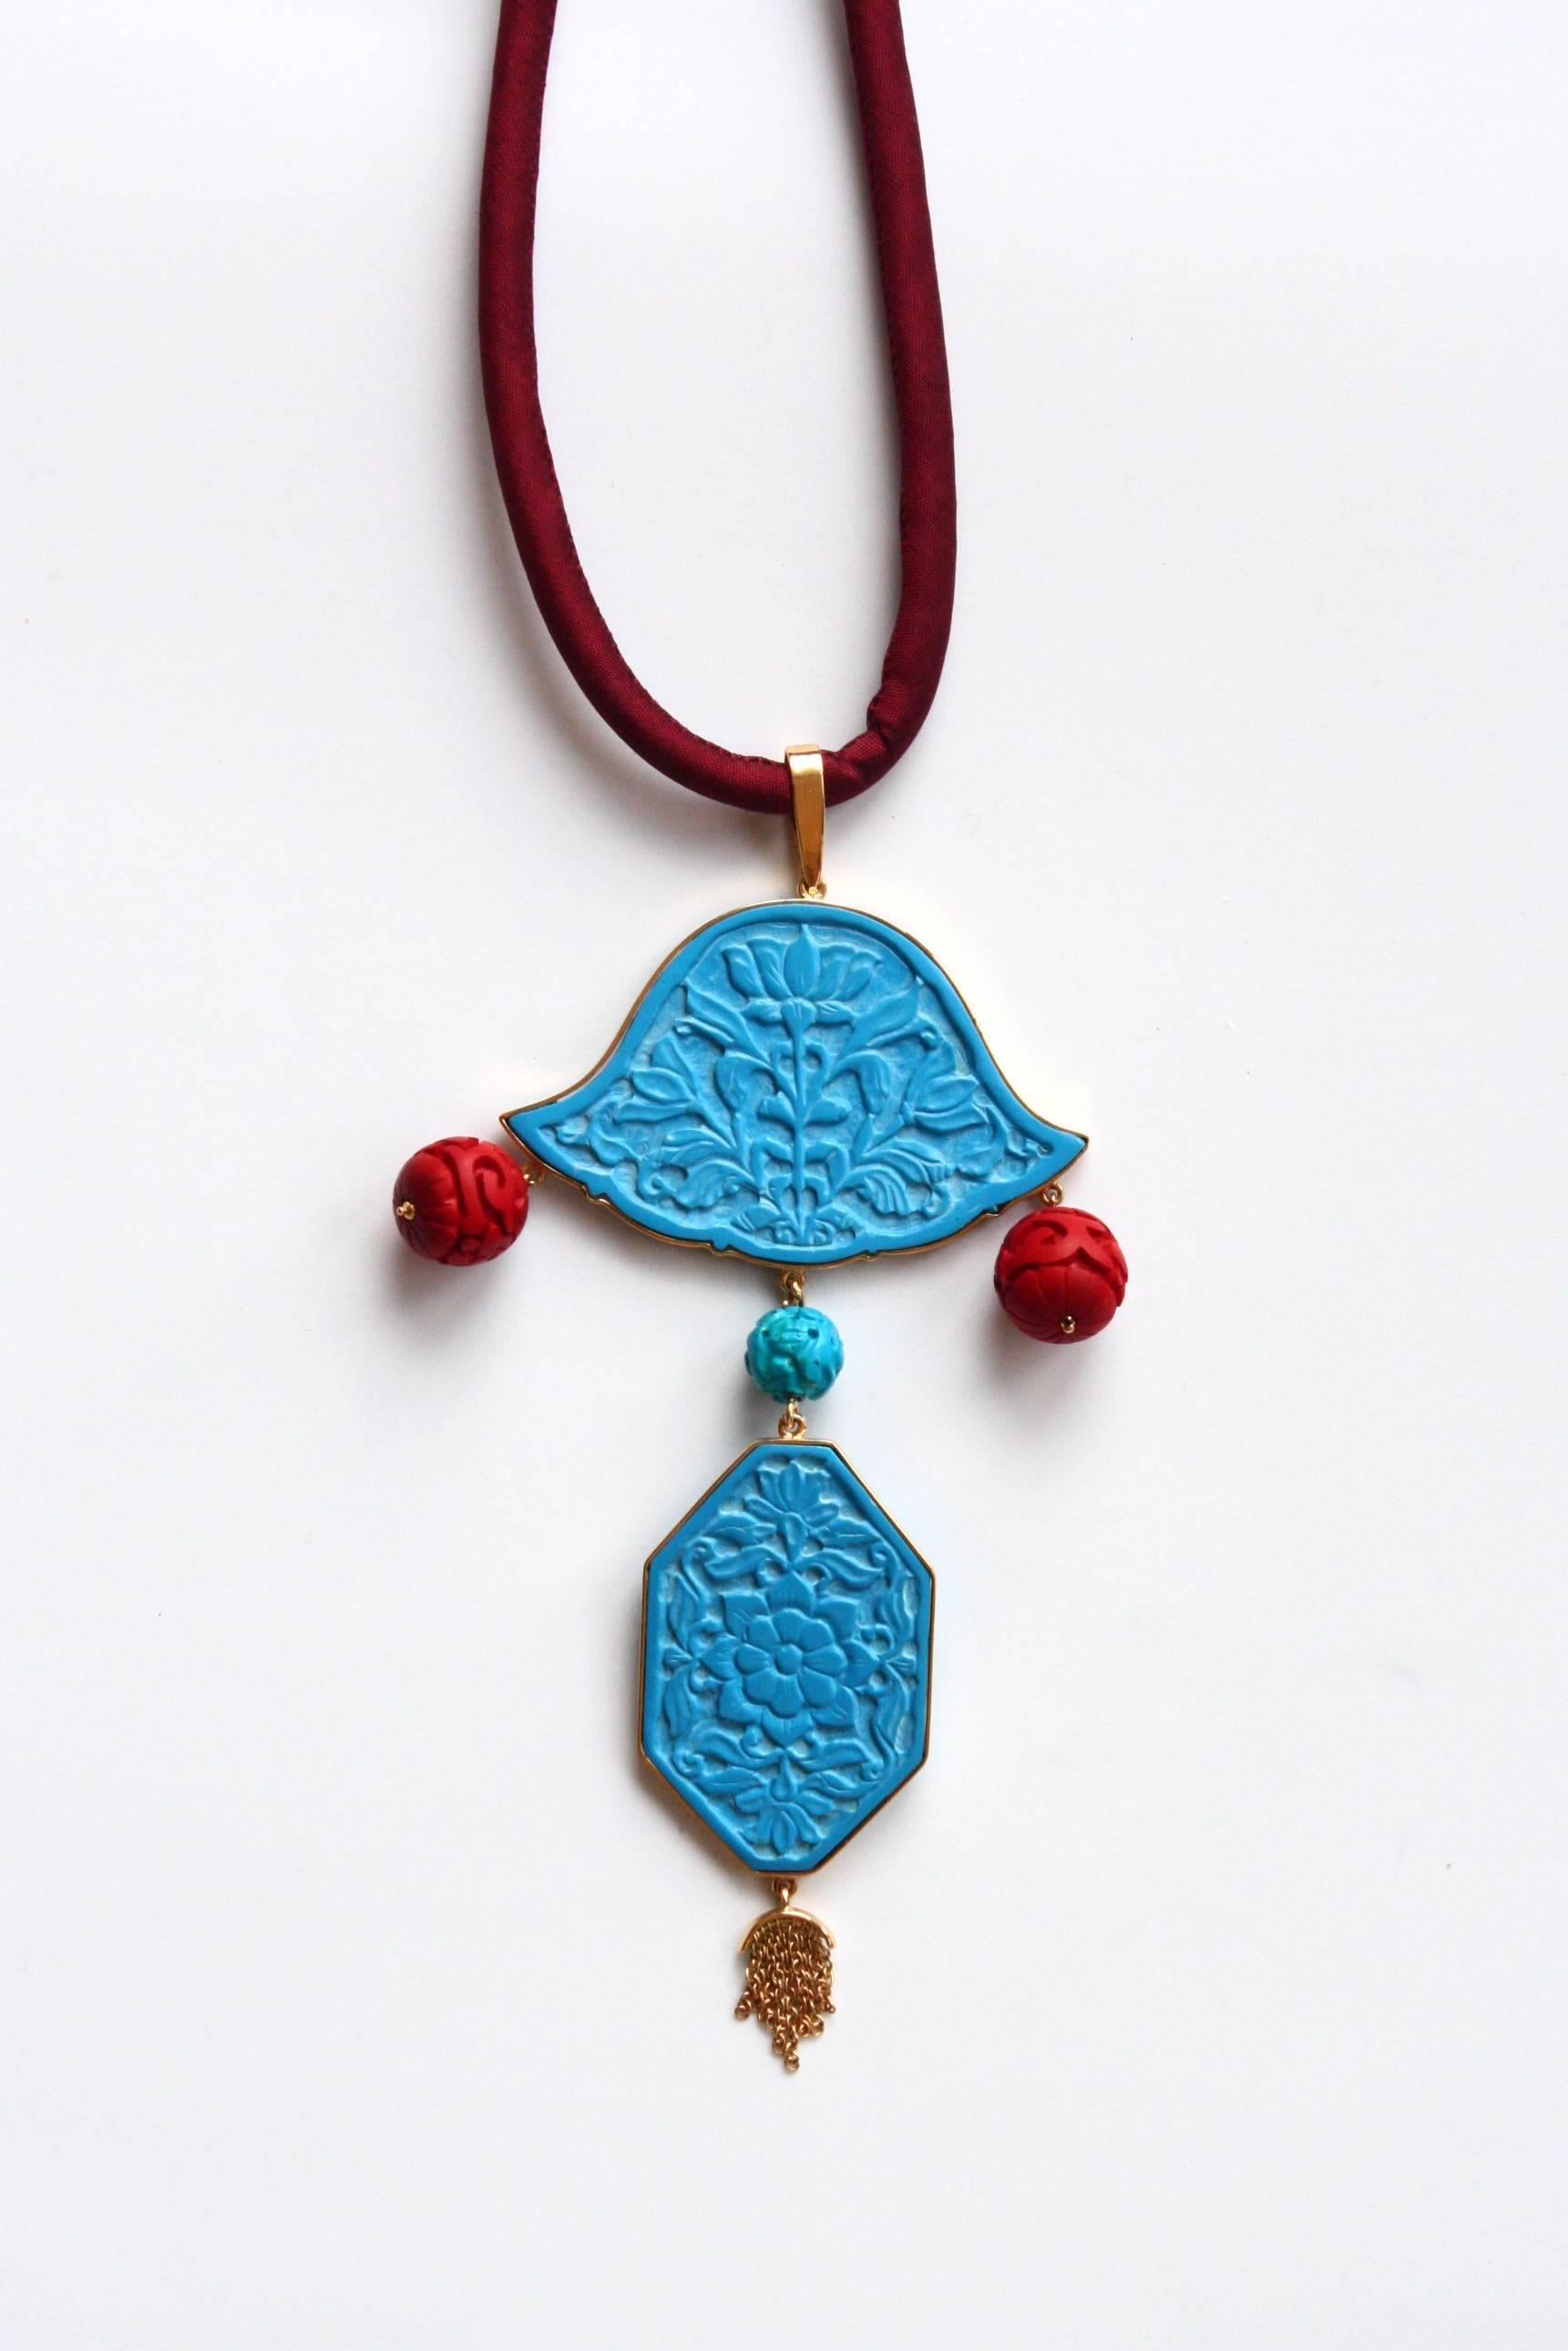 Antiques Indian Turquoise plaques Gold 18,40 gr, Chinese laquer. Total lenght 15cm.
All jewelry is new and has never been previously owned or worn. Each item will arrive at your door beautifully gift wrapped in our boxes, put inside an elegant pouch